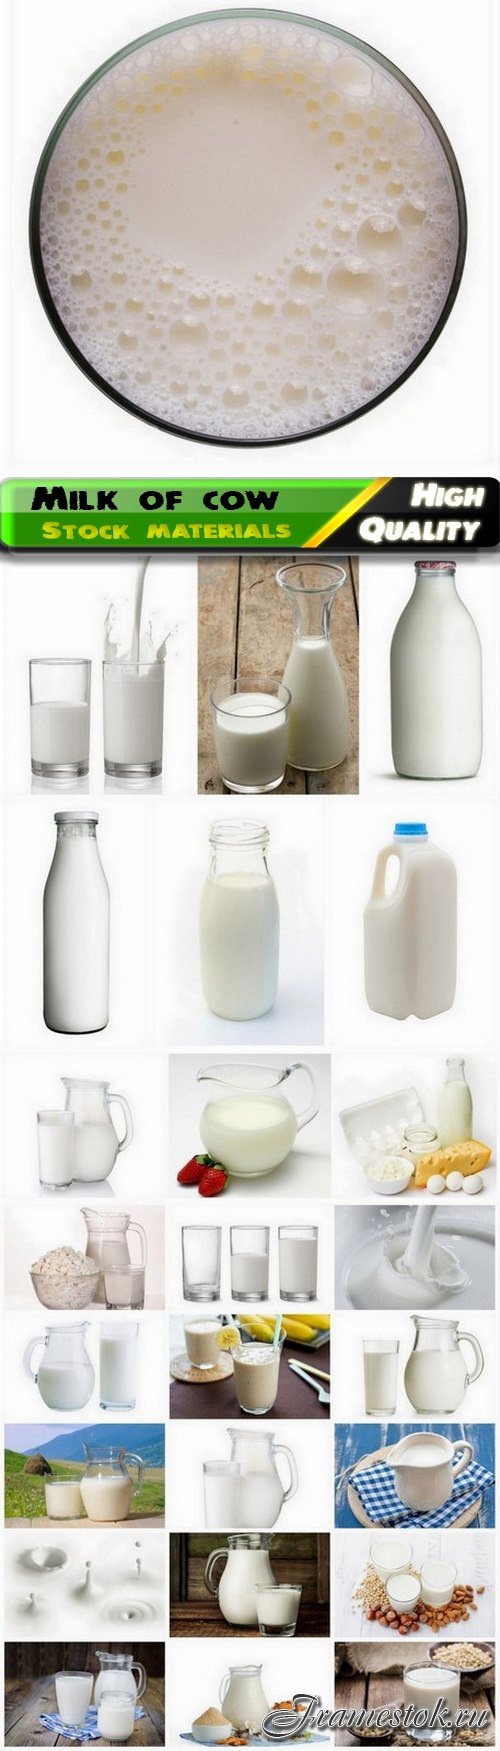 Milk of cow in glass and jug and dairy products - 25 HQ Jpg